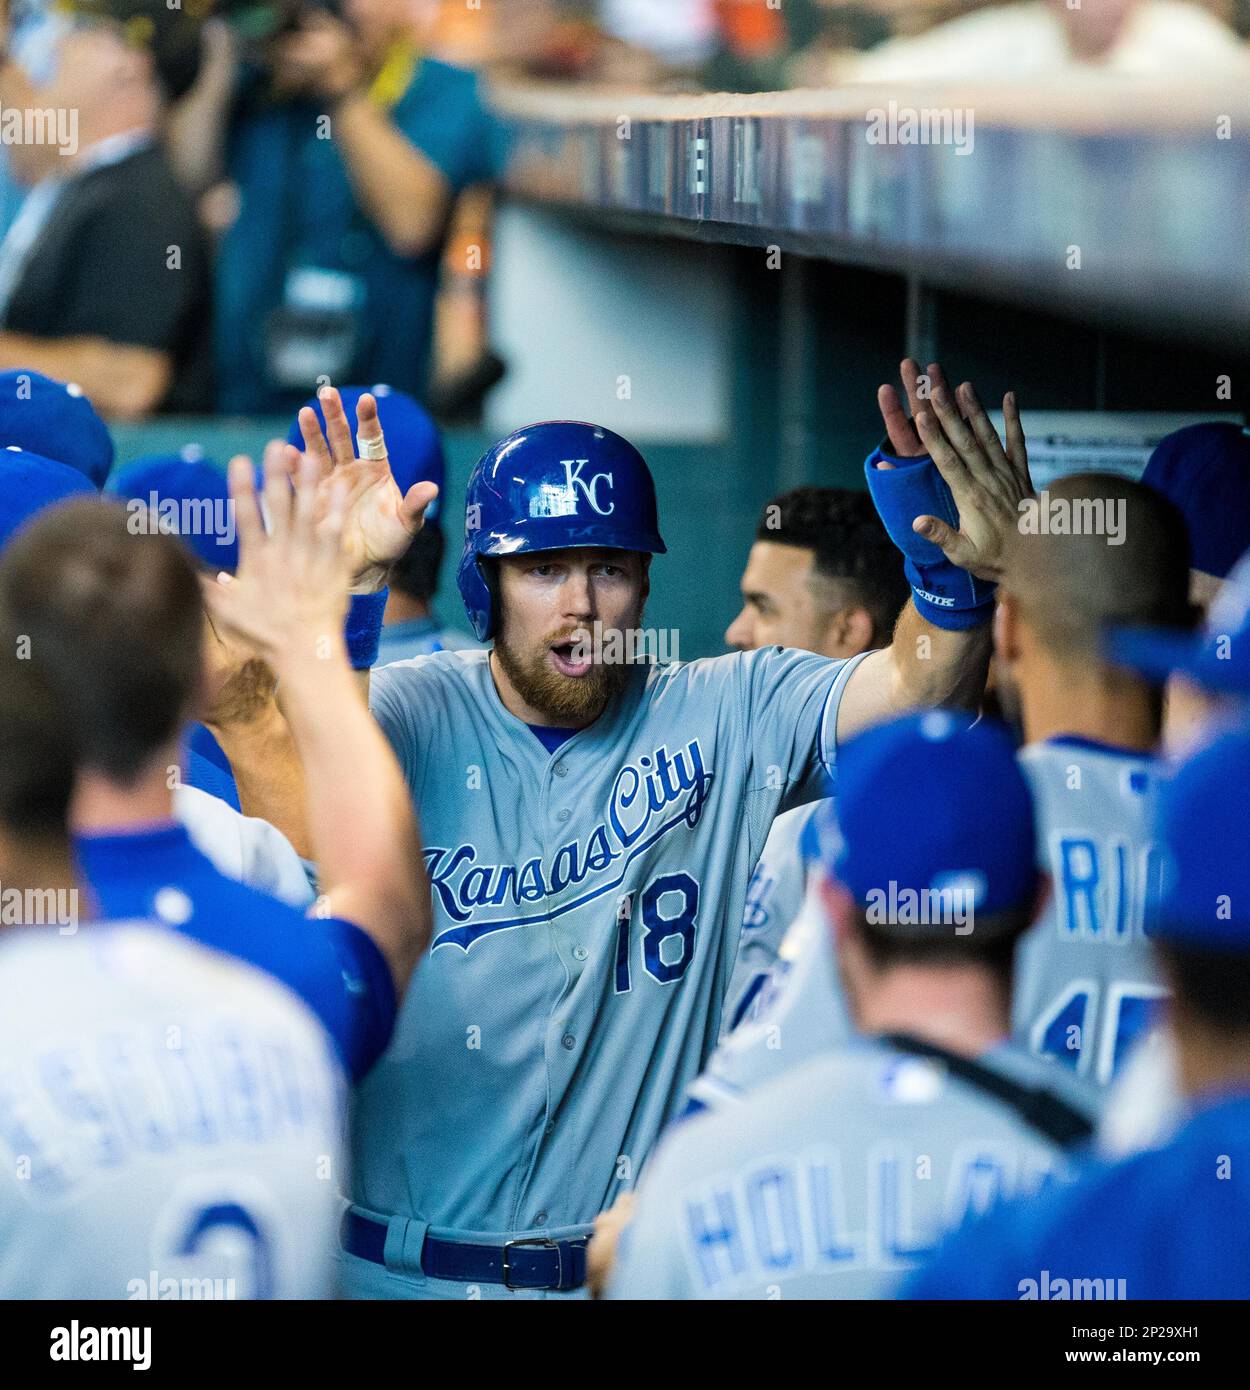 August 13, 2015: Ben Zobrist #18 of the Kansas City Royals makes an  outfield catch in the second inning during the MLB game between the Los  Angeles Angels and the Kansas City